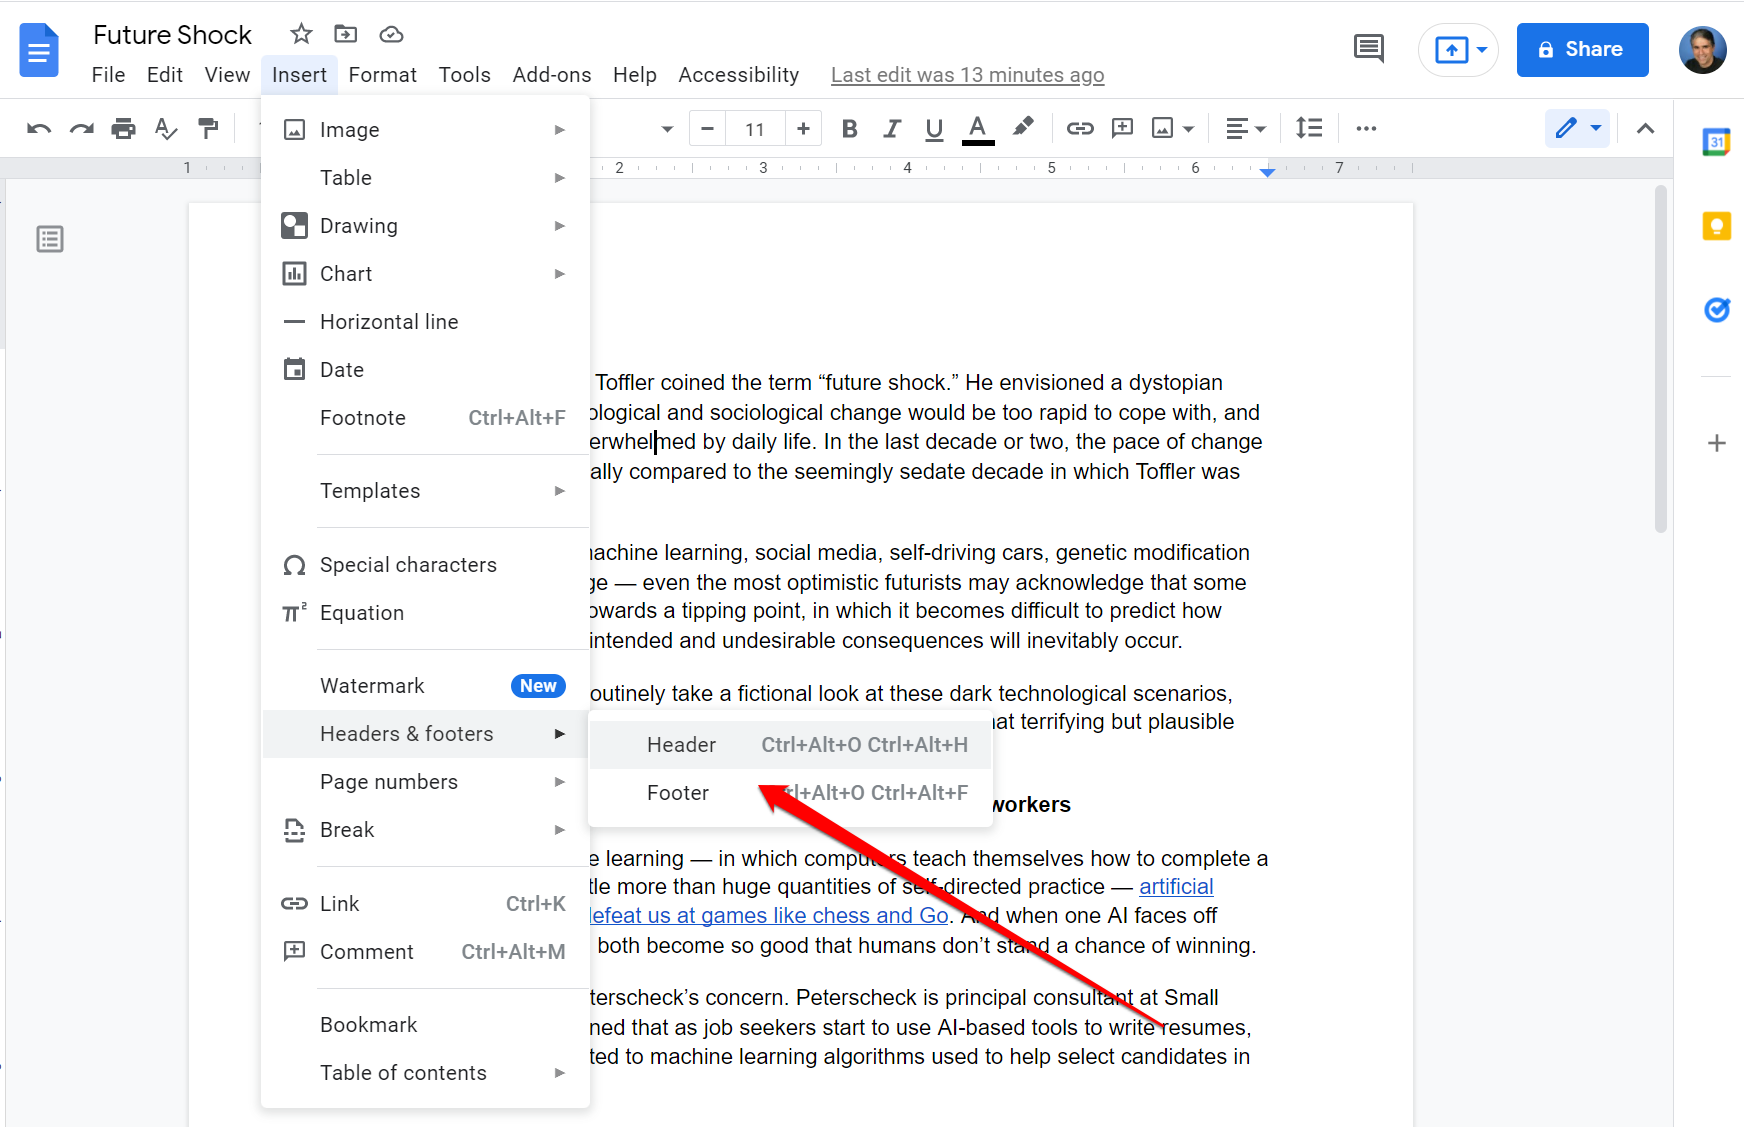 edit google doc template footer background